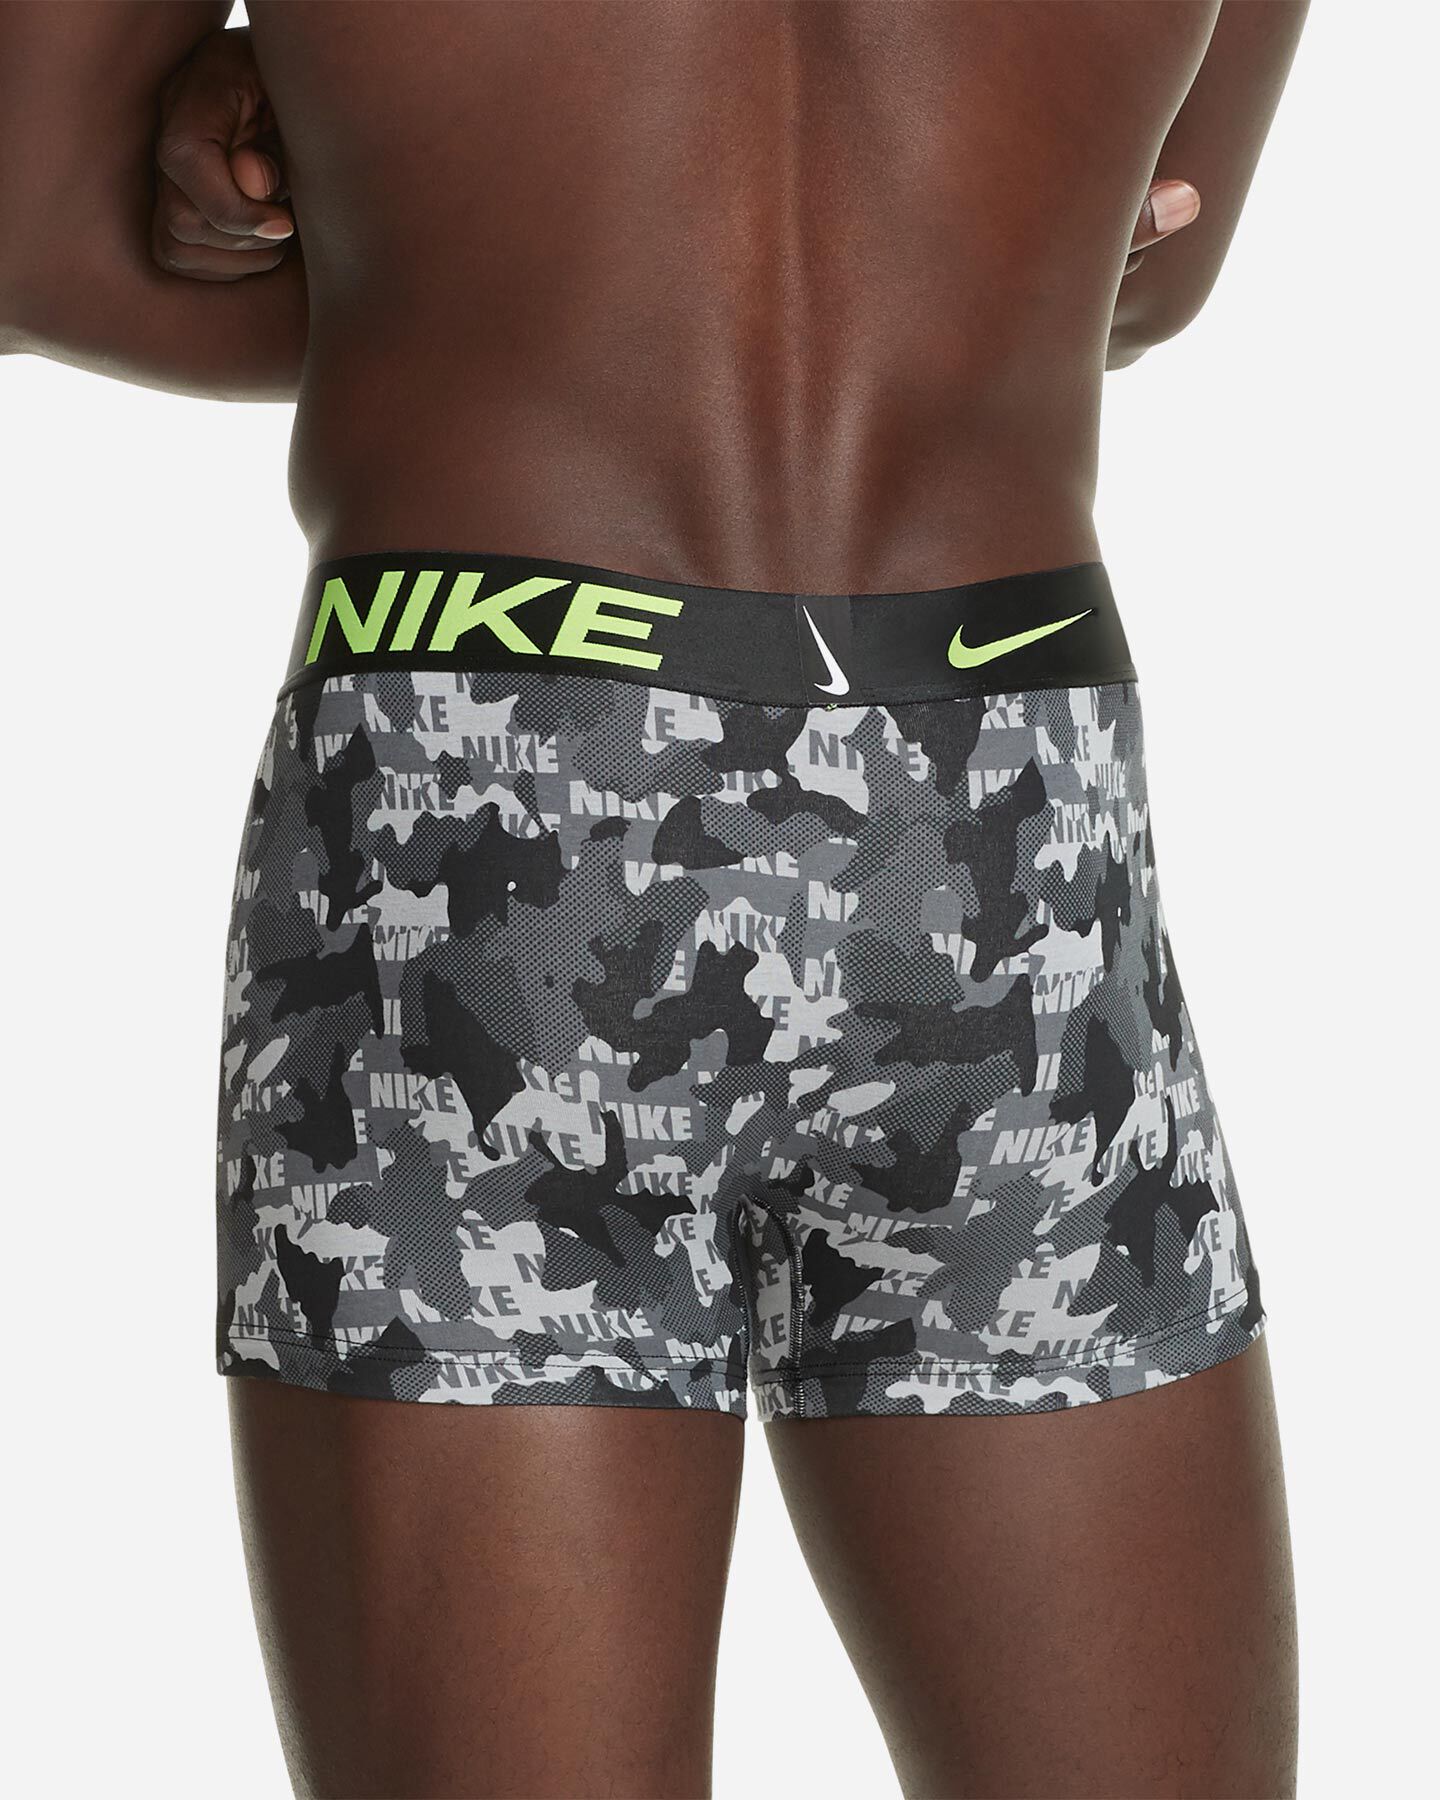  Intimo NIKE BOXER LUXE M S4095171|KUZ|S scatto 2